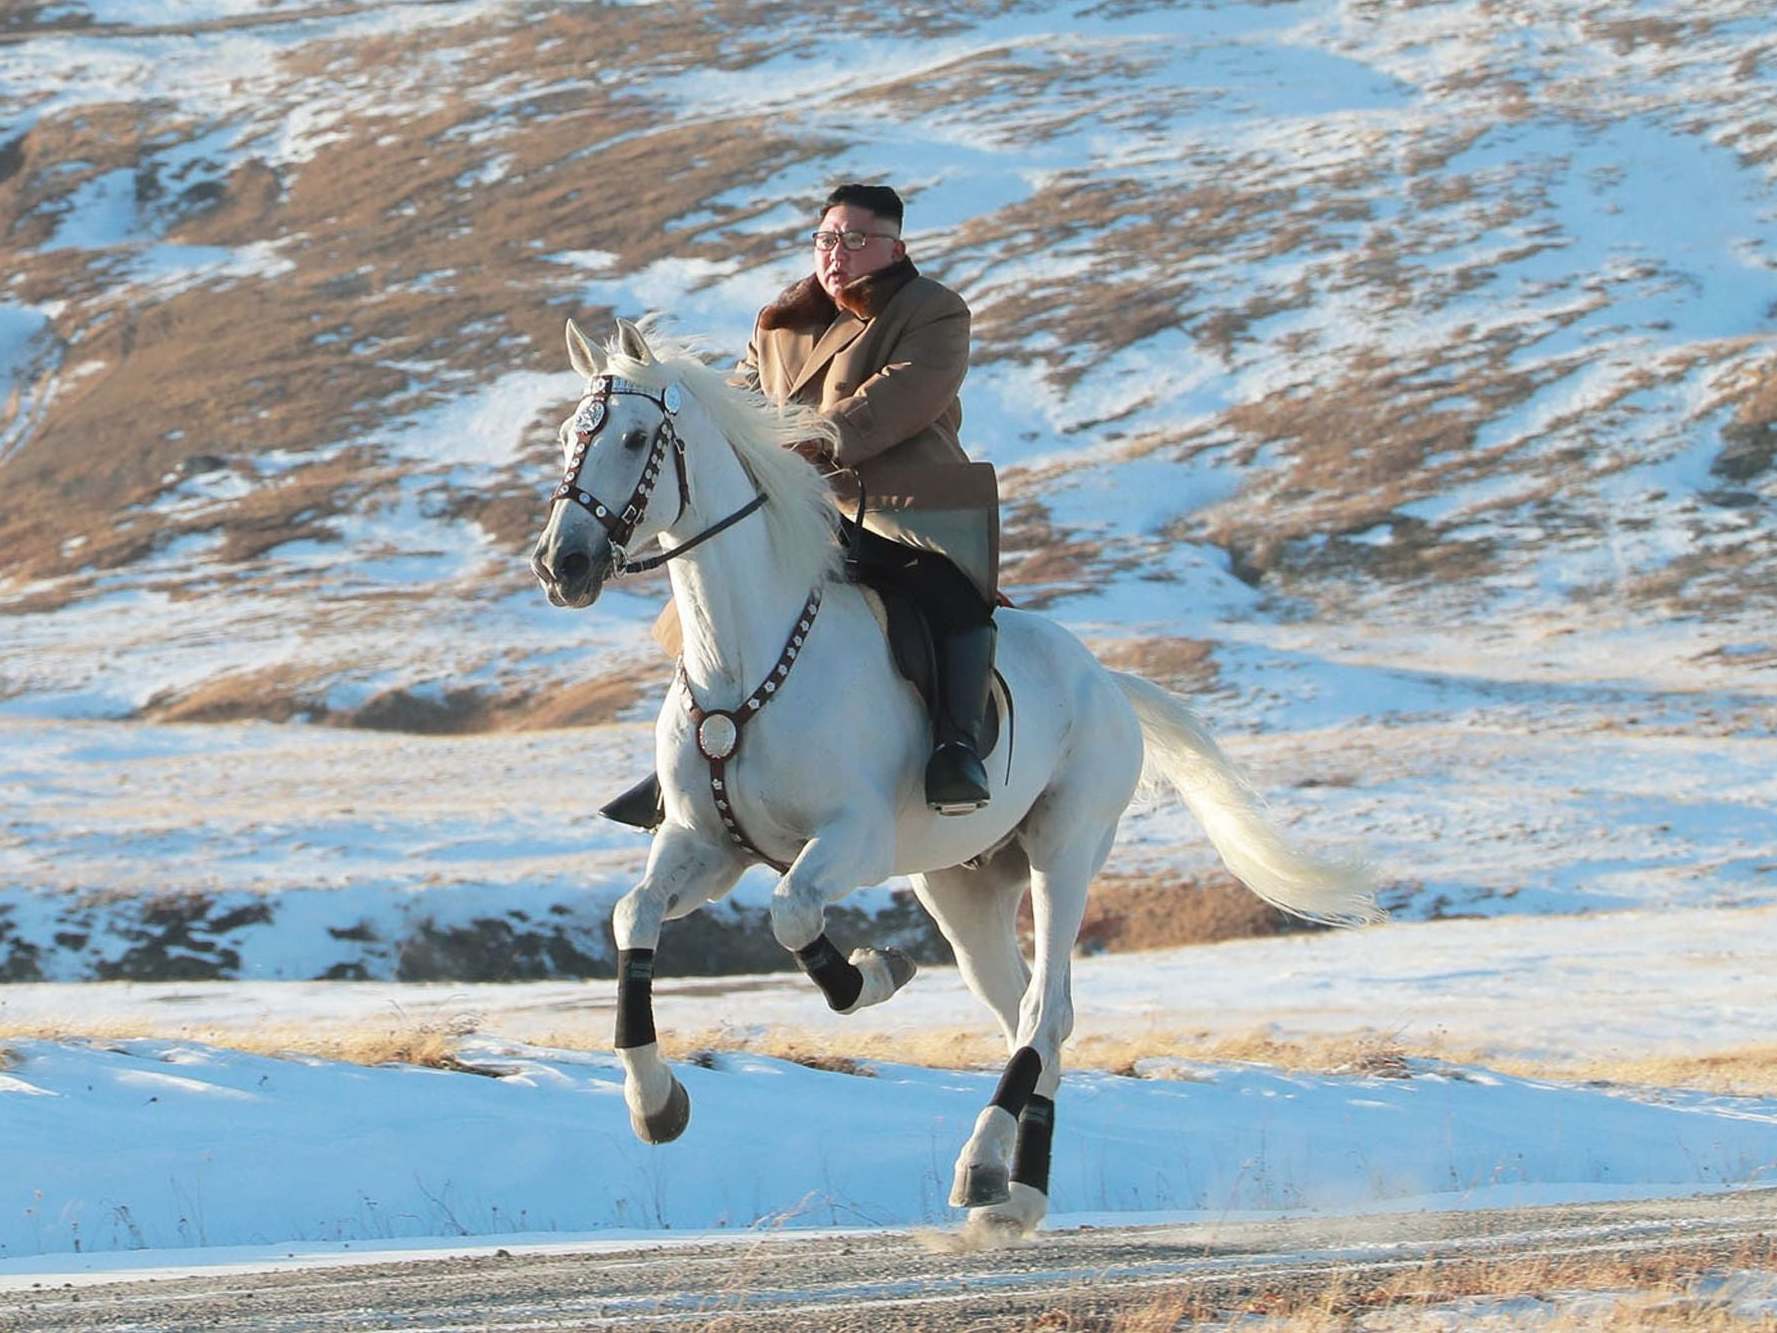 ‘His march on horseback in Mt Paektu is a great event of weighty importance in the history of the Korean revolution,’ reported the state newspaper